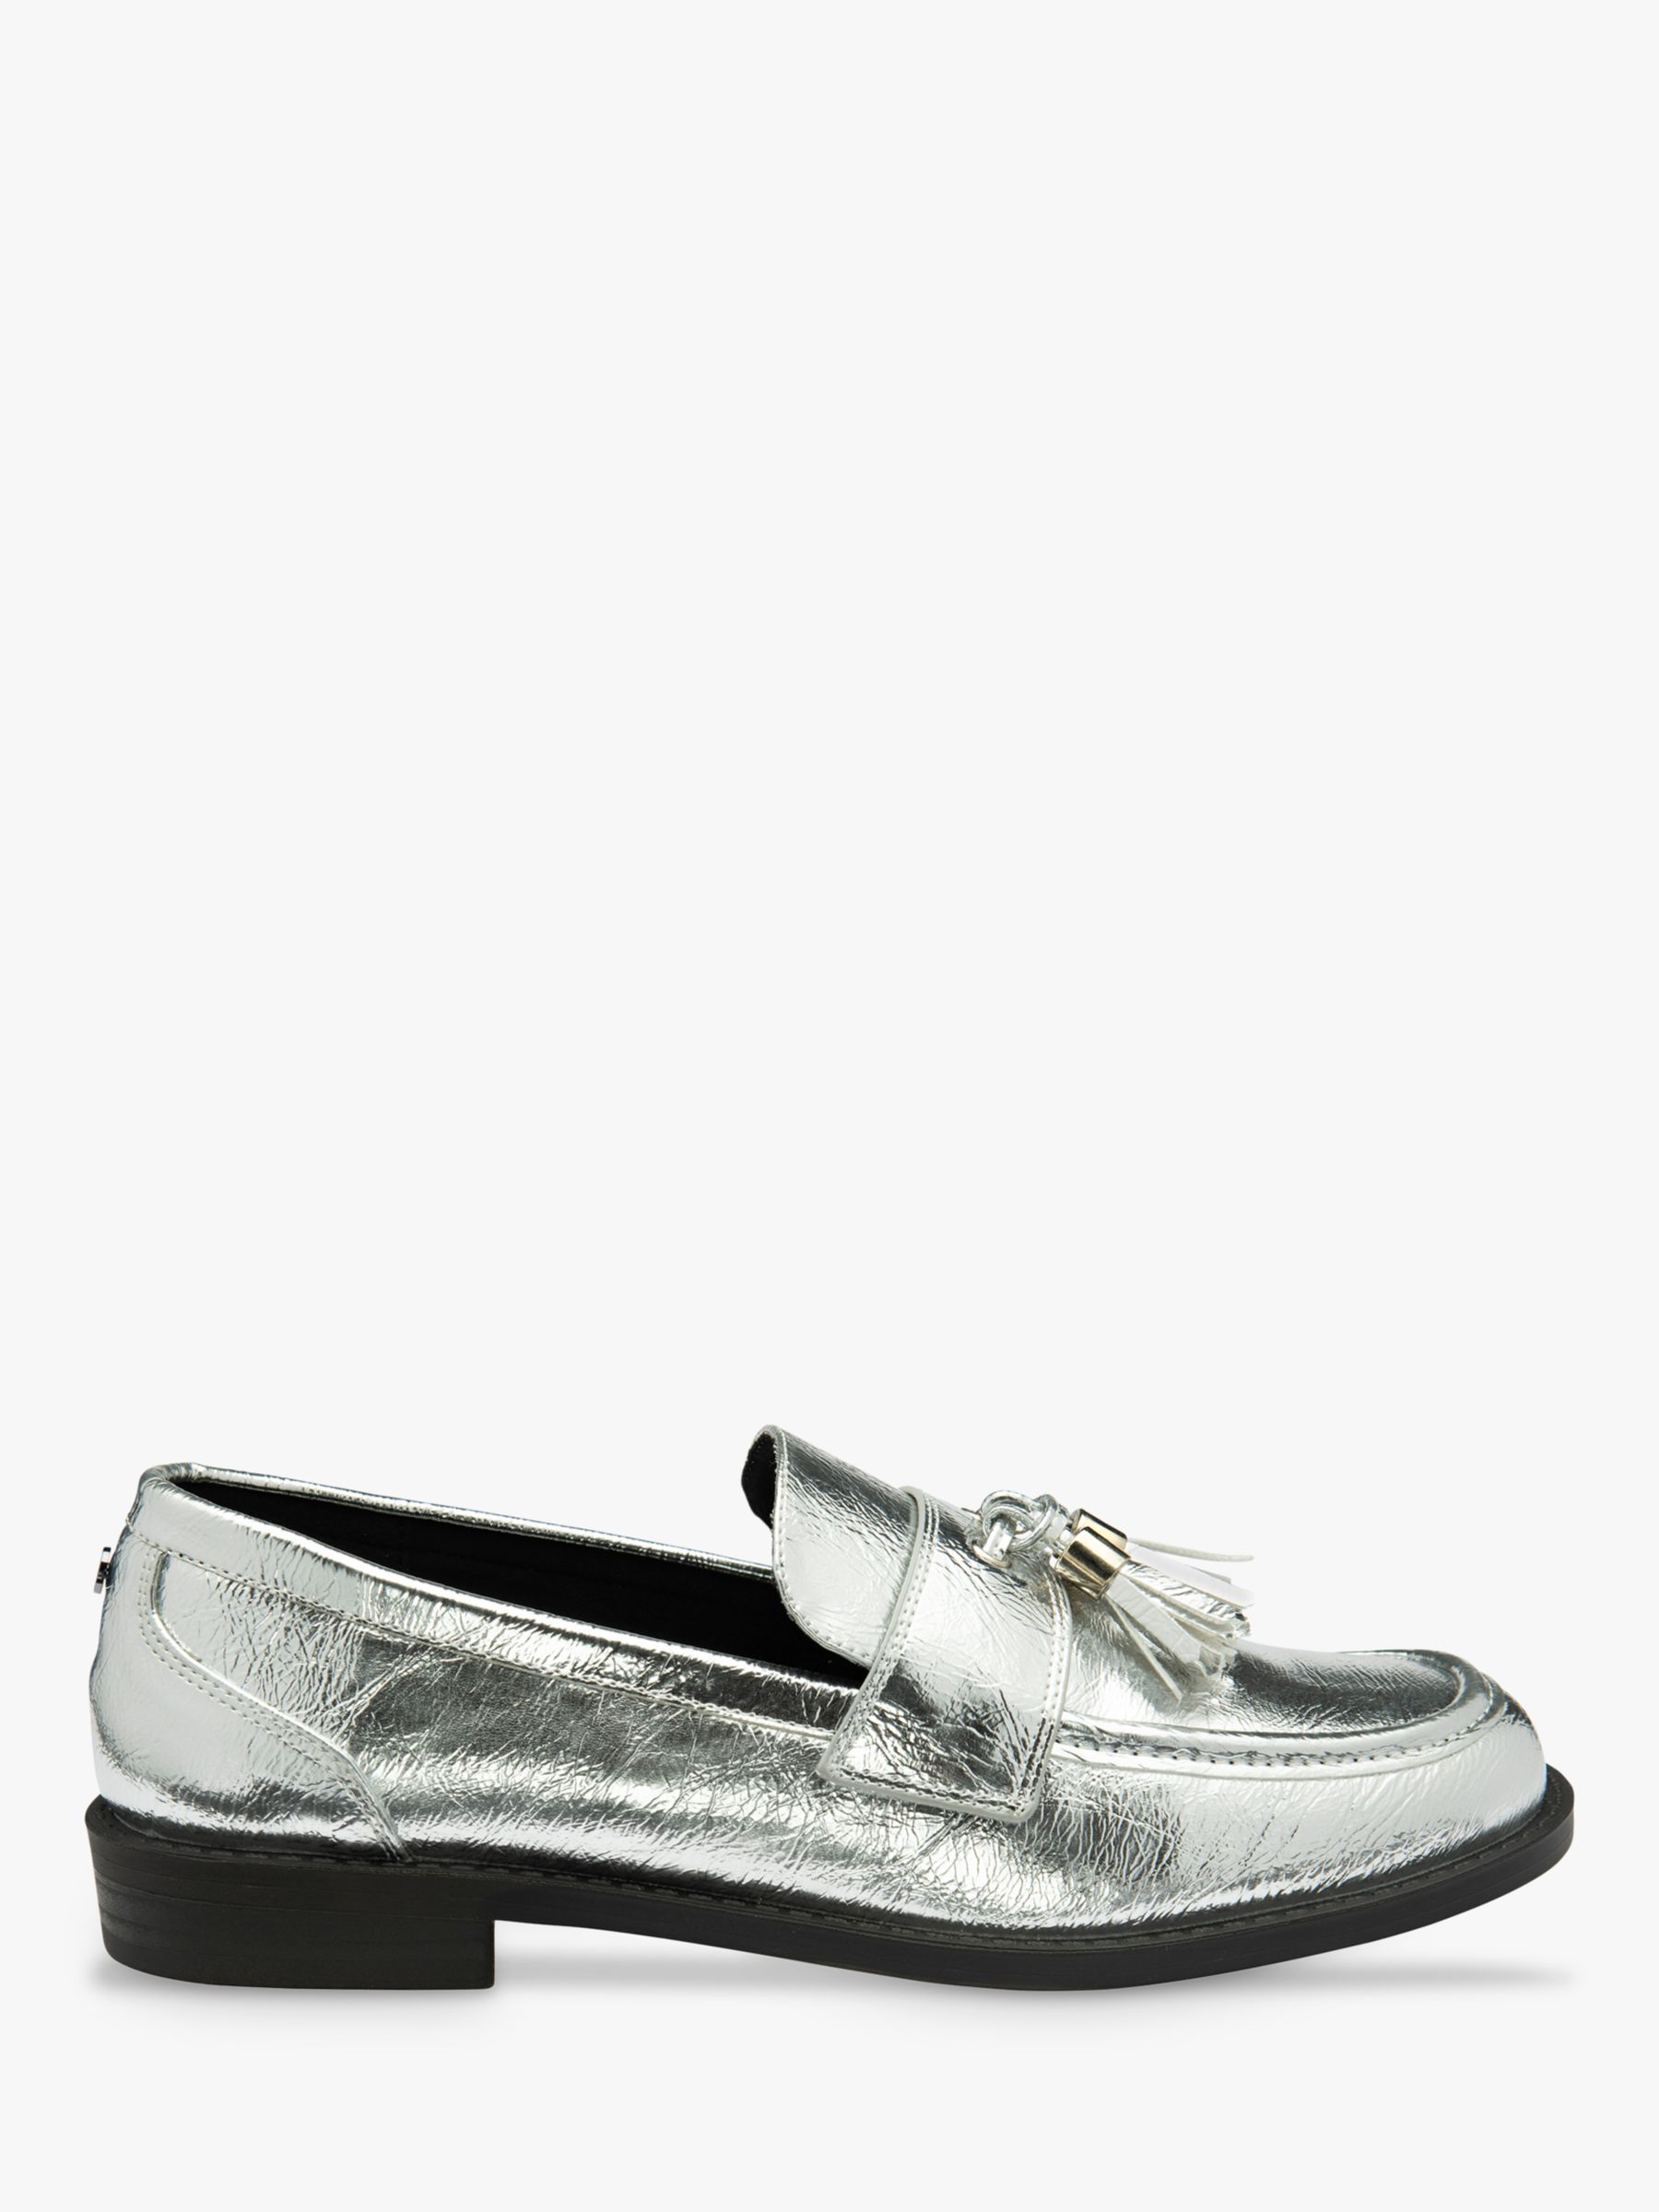 Ravel Tavy Loafers, Silver, 4